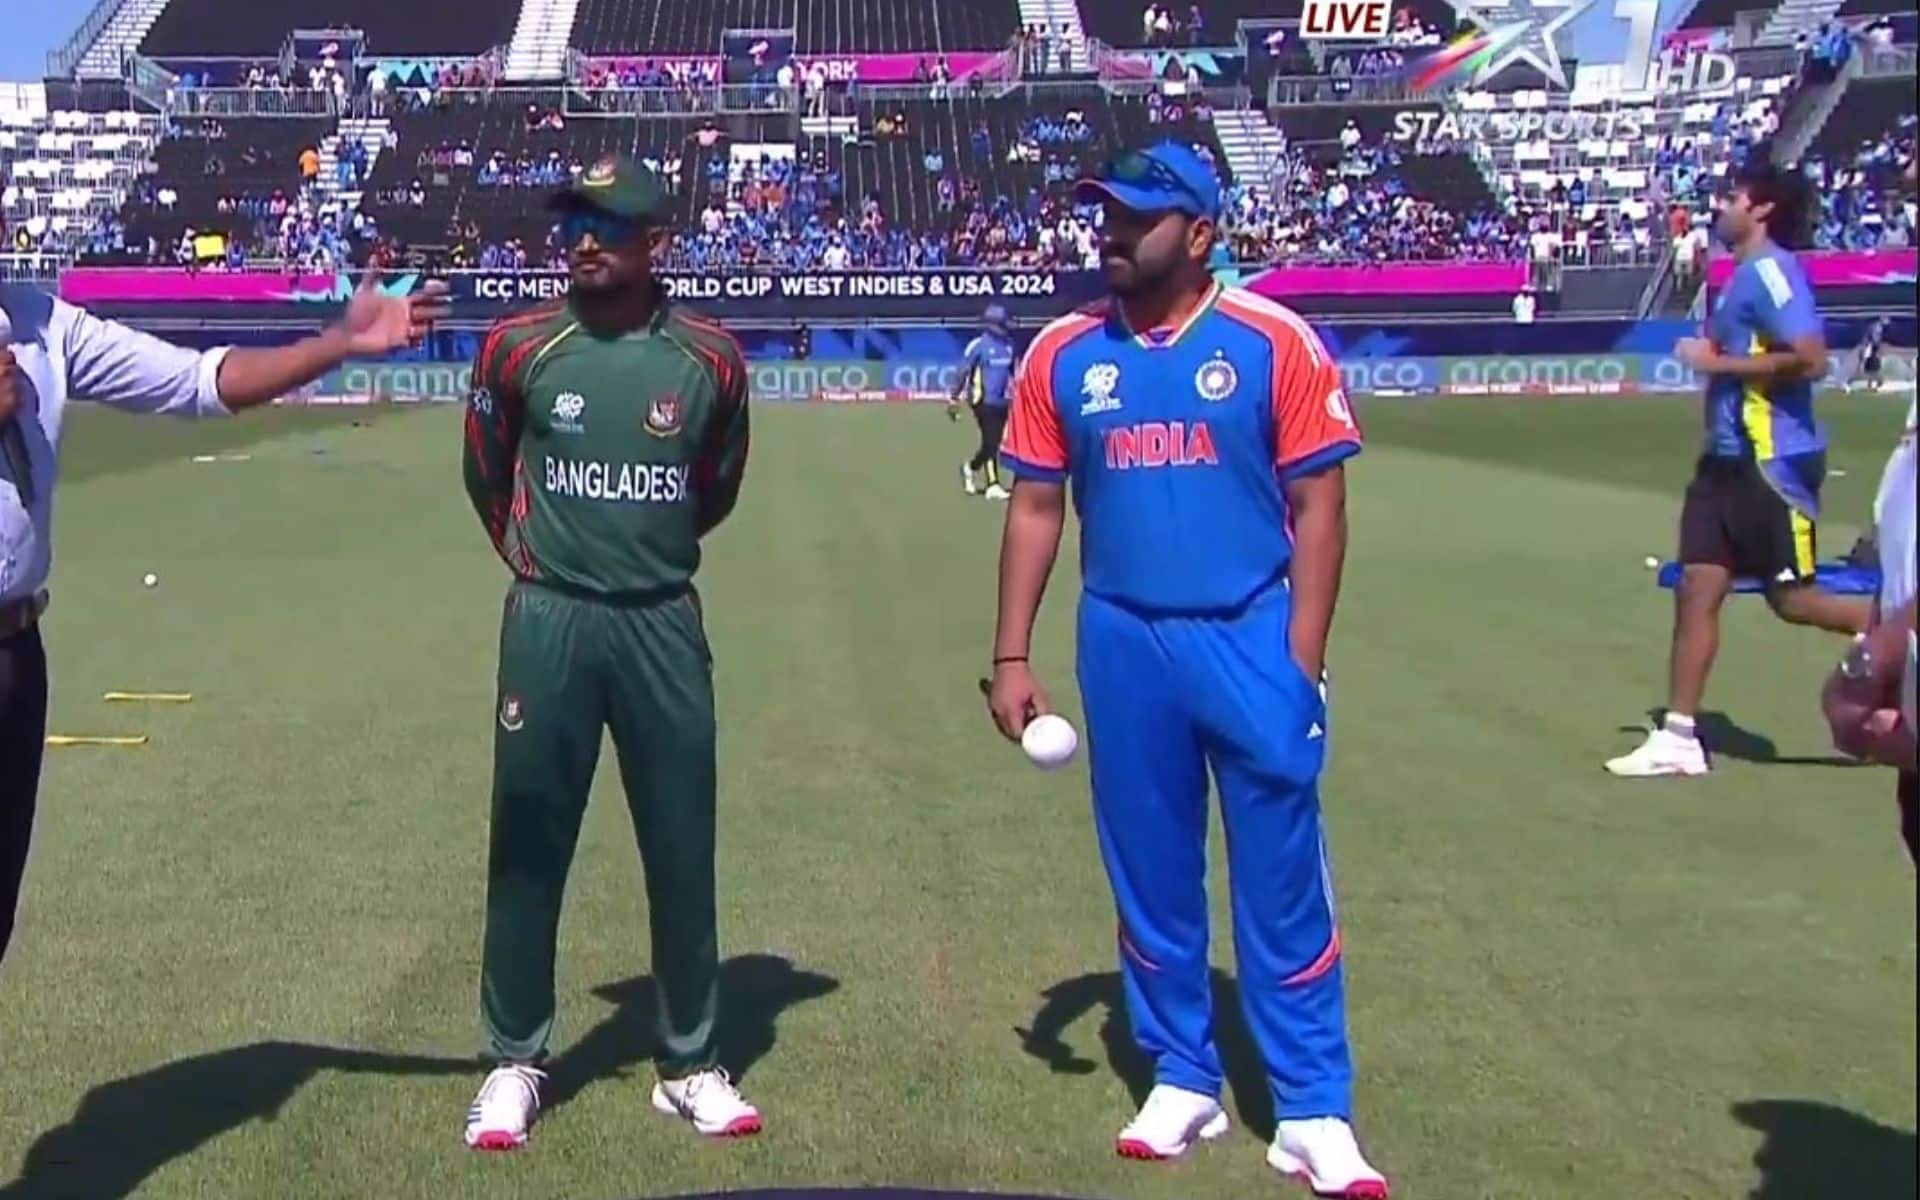 India won the toss and opted to bat first (X.com)